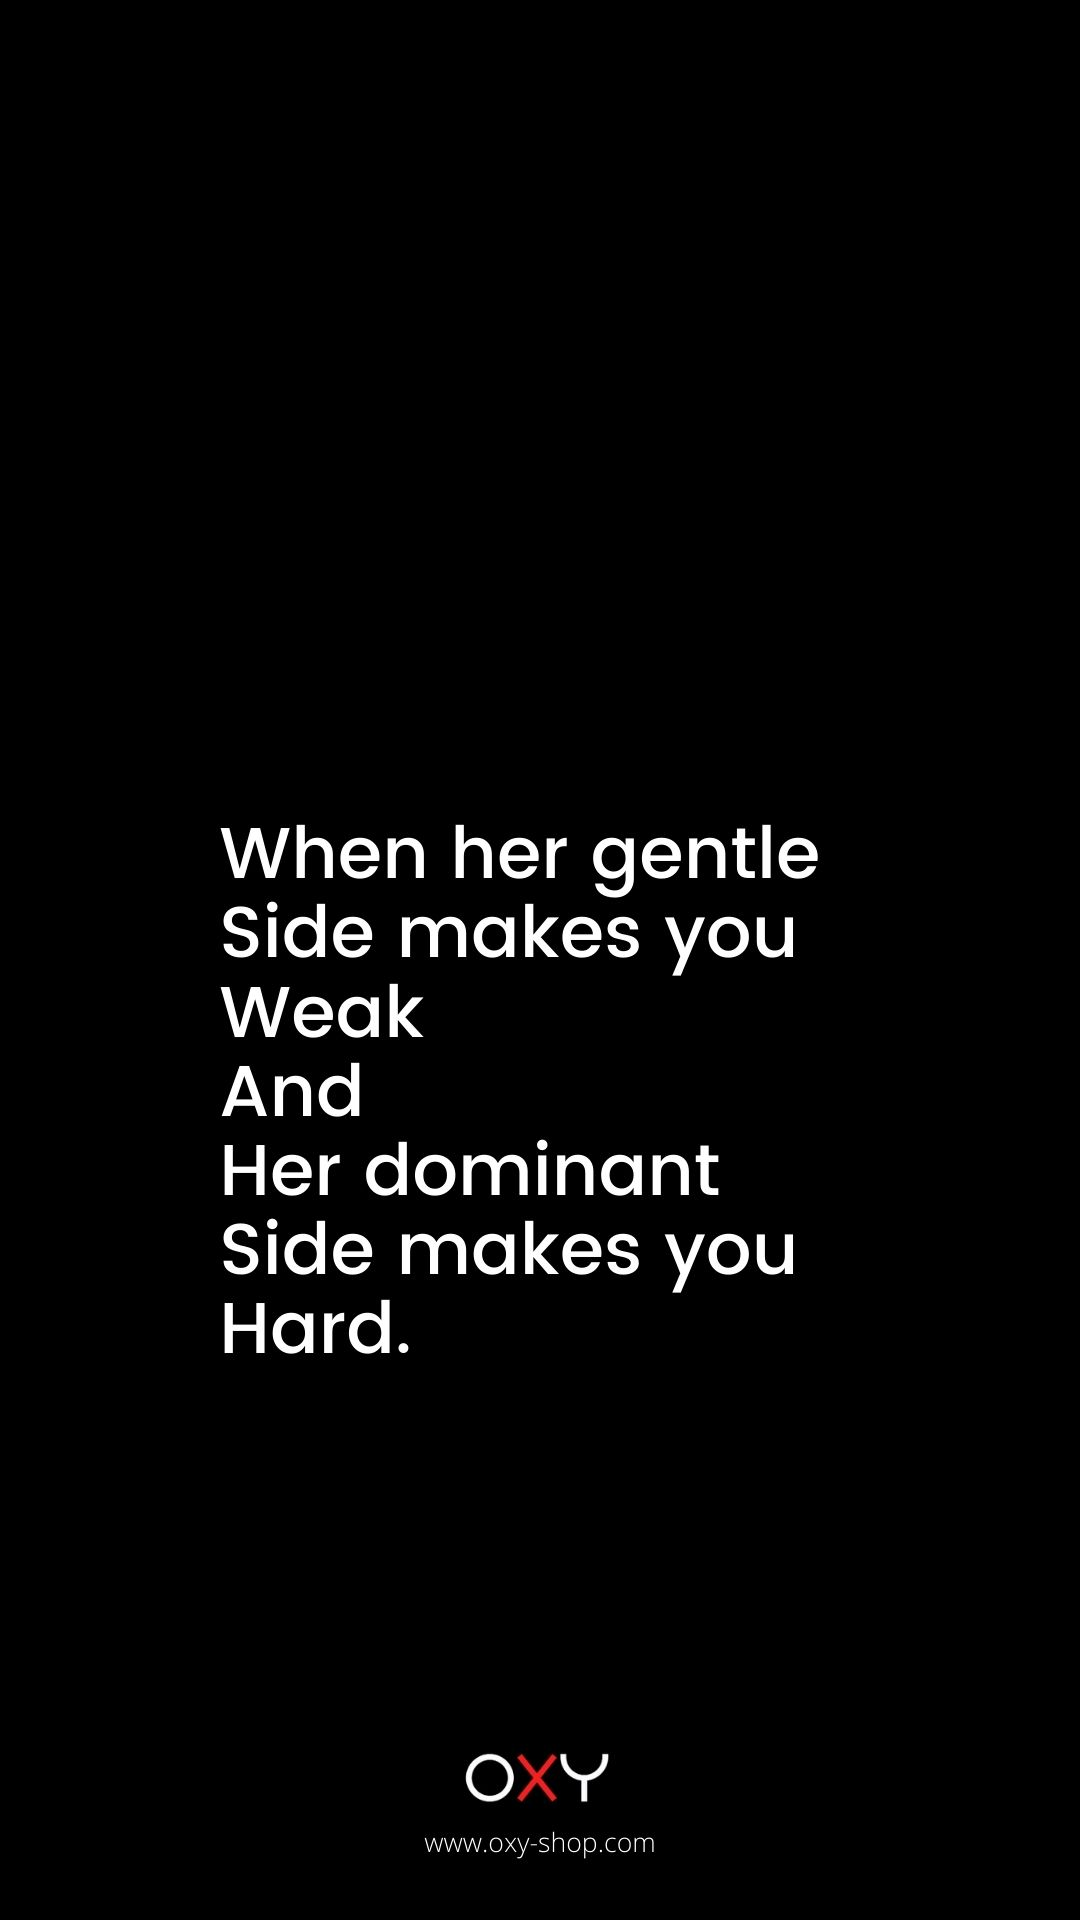 When her gentle side makes you weak and her dominant side makes you hard. - BDSM wallpaper